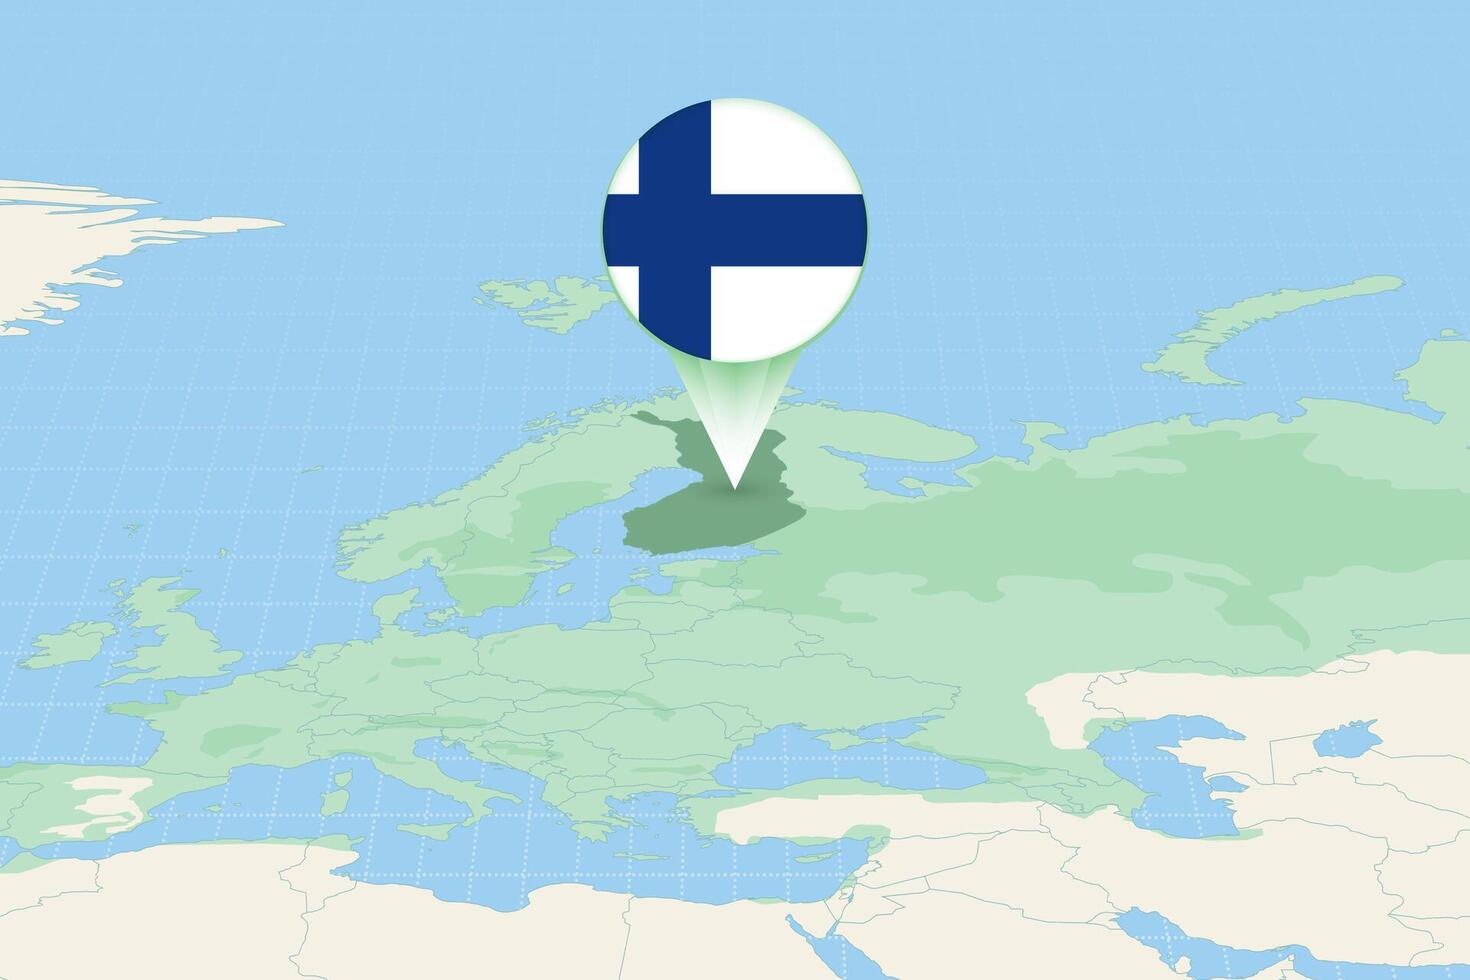 Map illustration of Finland with the flag. Cartographic illustration of Finland and neighboring countries. vector